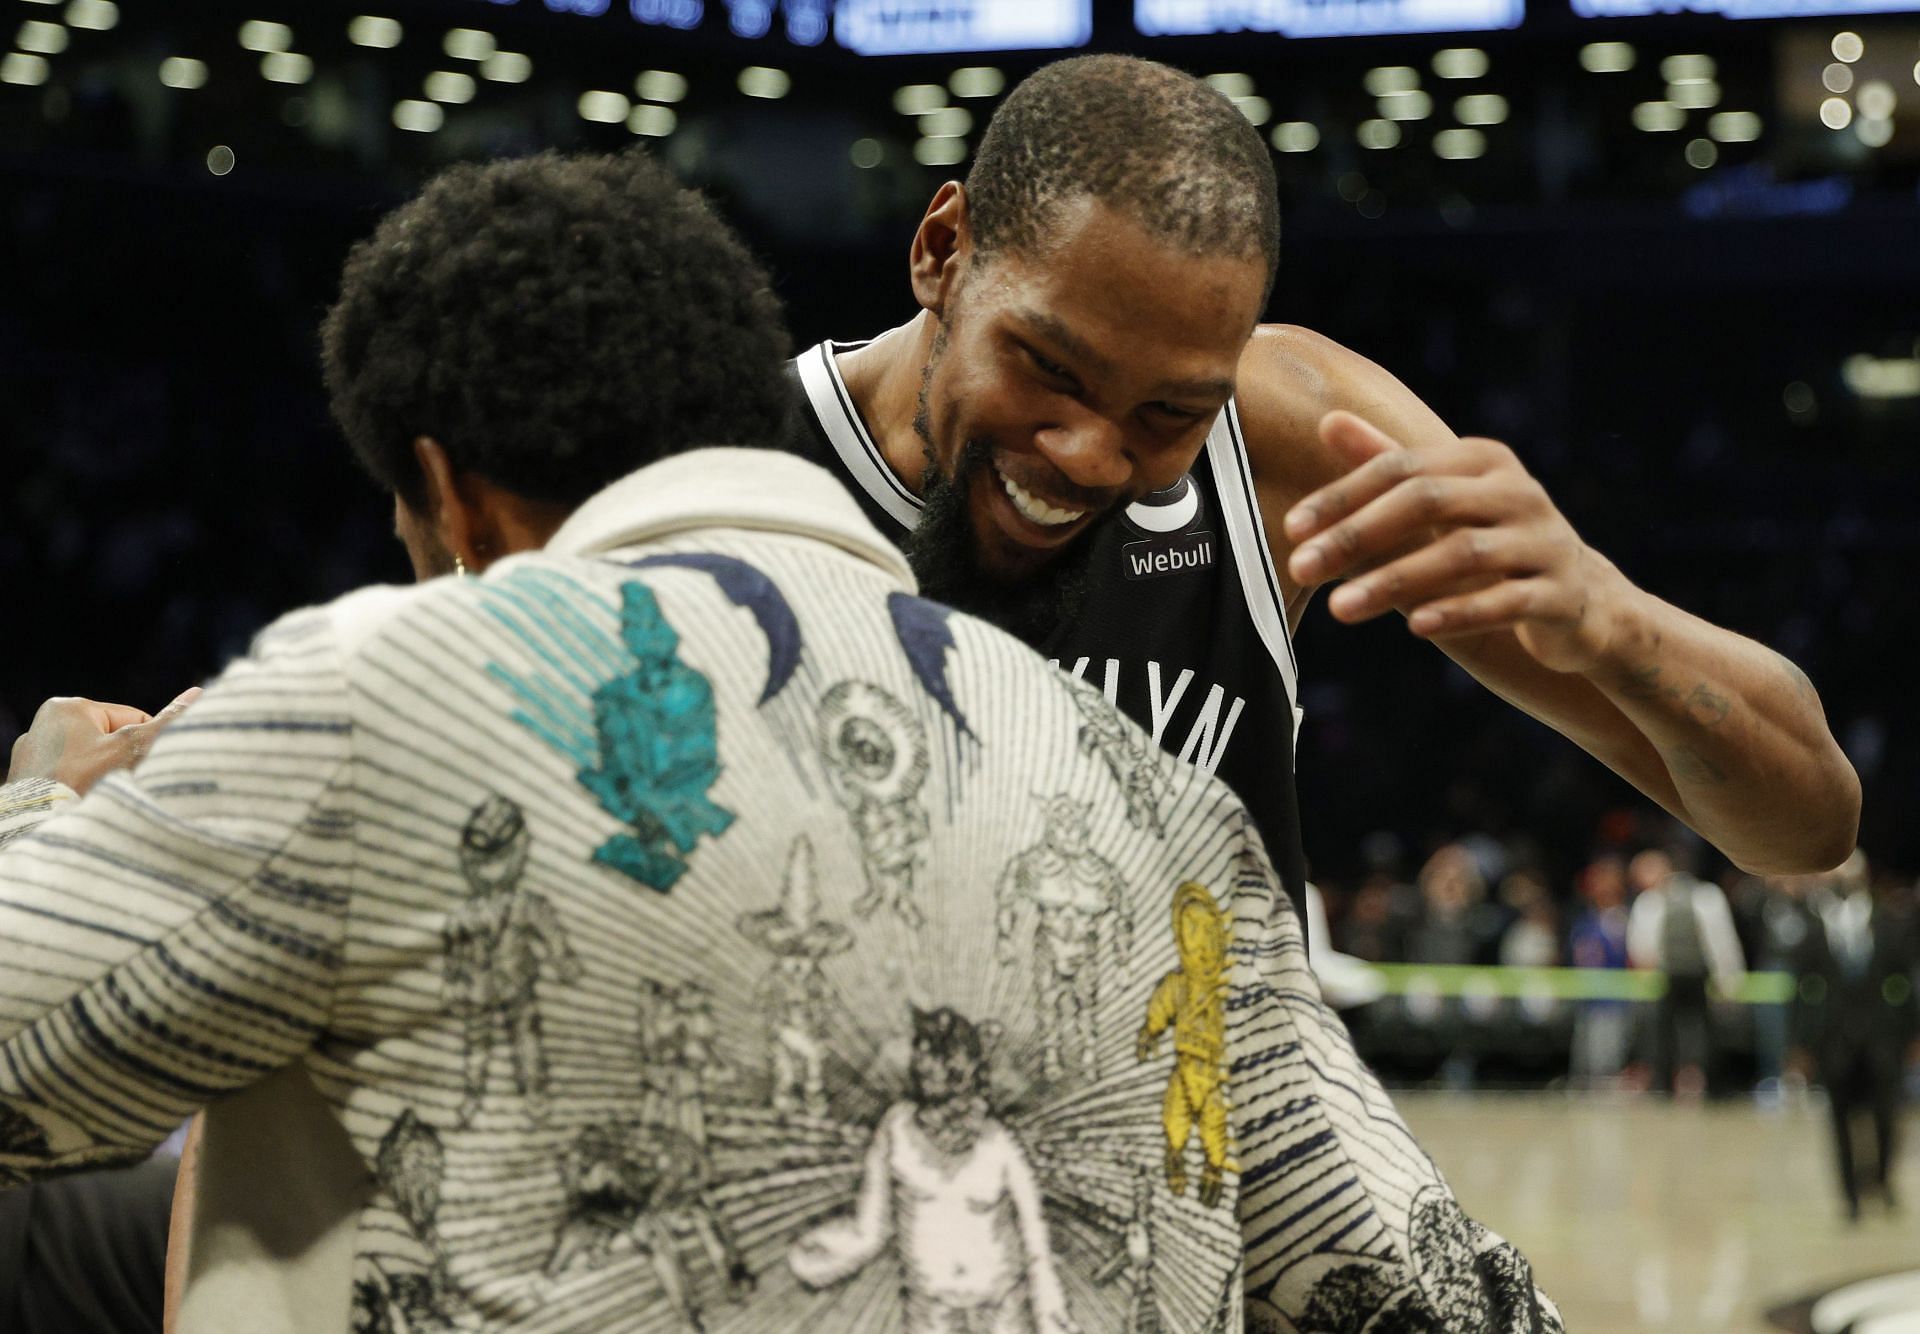 Kyrie &lt;a href=&#039;https://www.sportskeeda.com/basketball/kyrie-irving&#039; target=&#039;_blank&#039; rel=&#039;noopener noreferrer&#039;&gt;Irving&lt;/a&gt; and Kevin Durant embrace after the win against the Knicks.